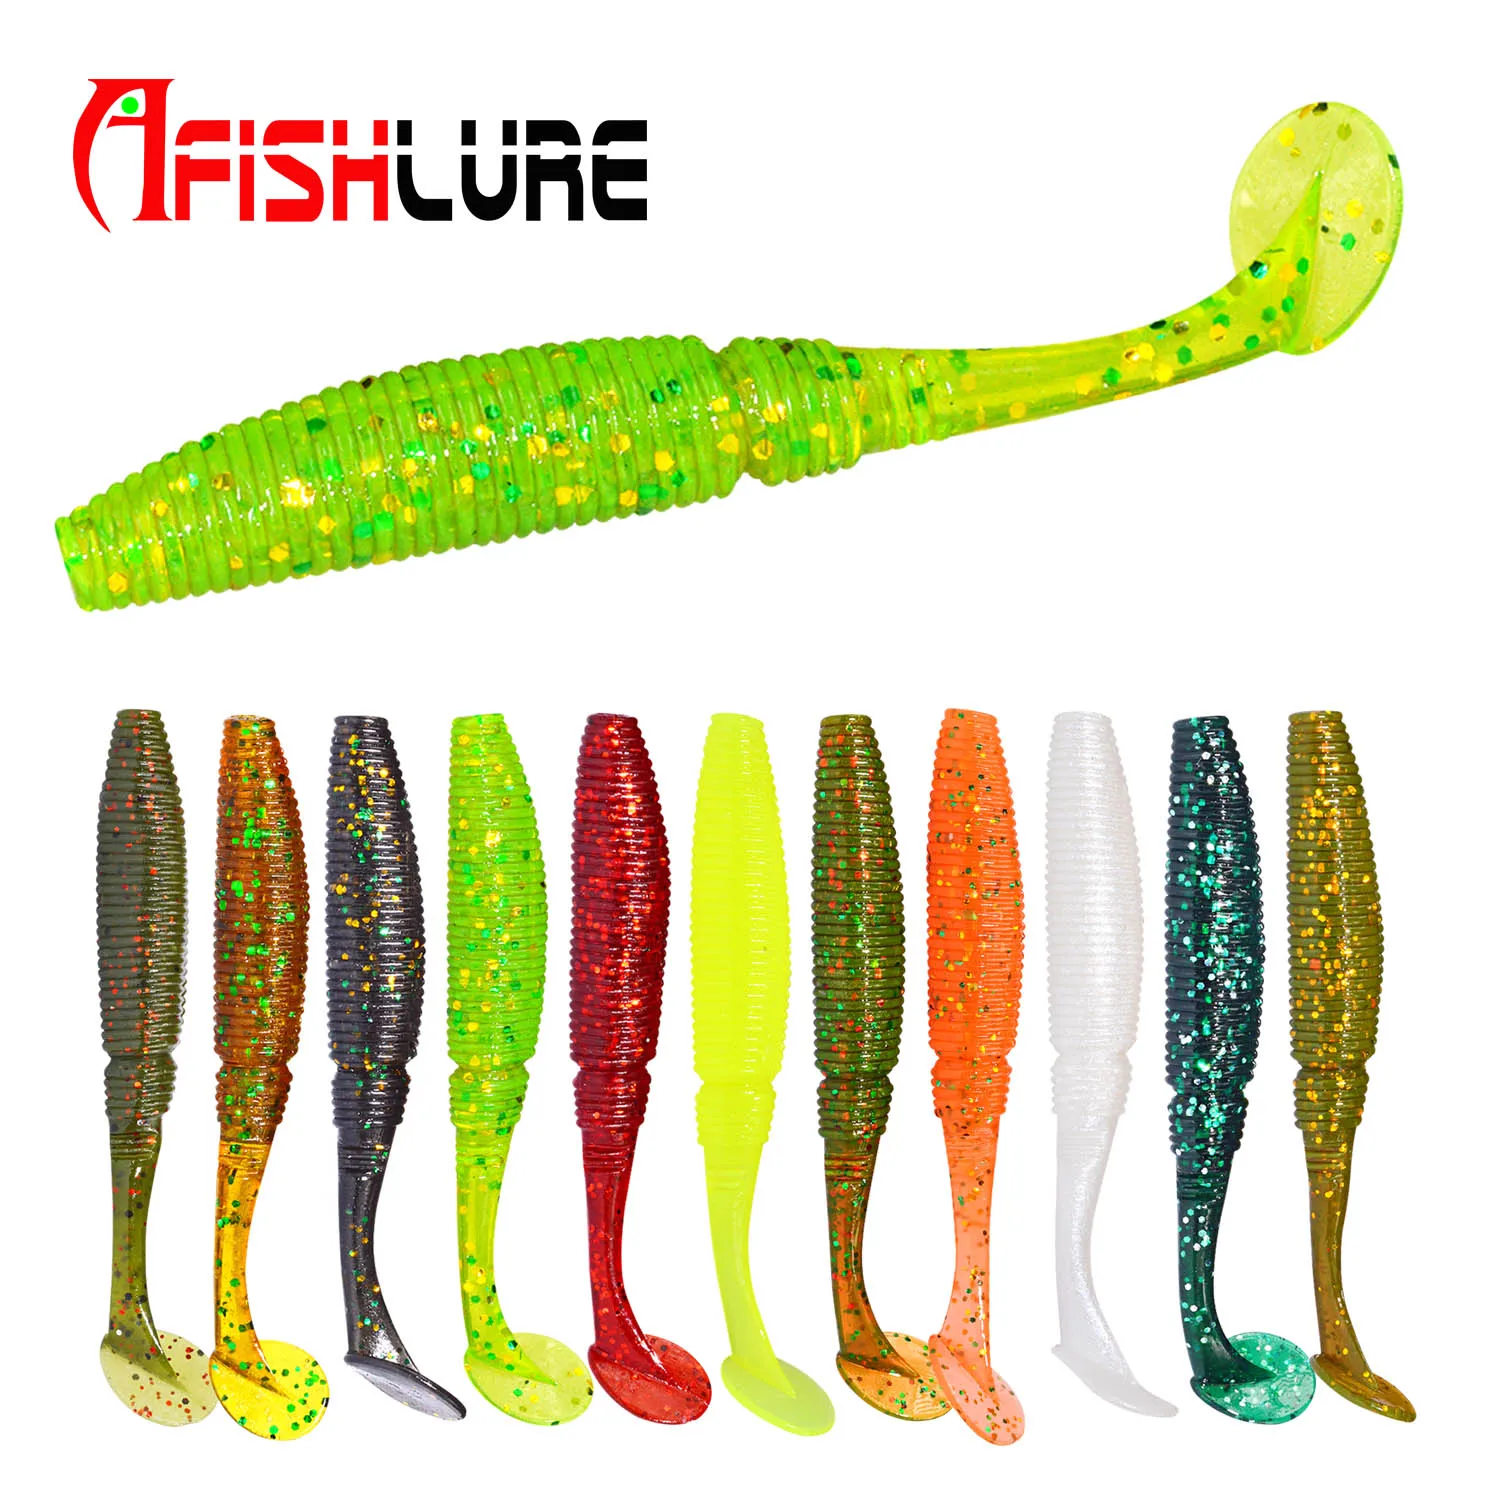 

T Tail Soft Worm Paddle Tail Swim Baits 75mm 3.2g 6pcs Worm Type Soft Plastic Pesca Fishing Jig Lures Free Sample, 11 colors for choice